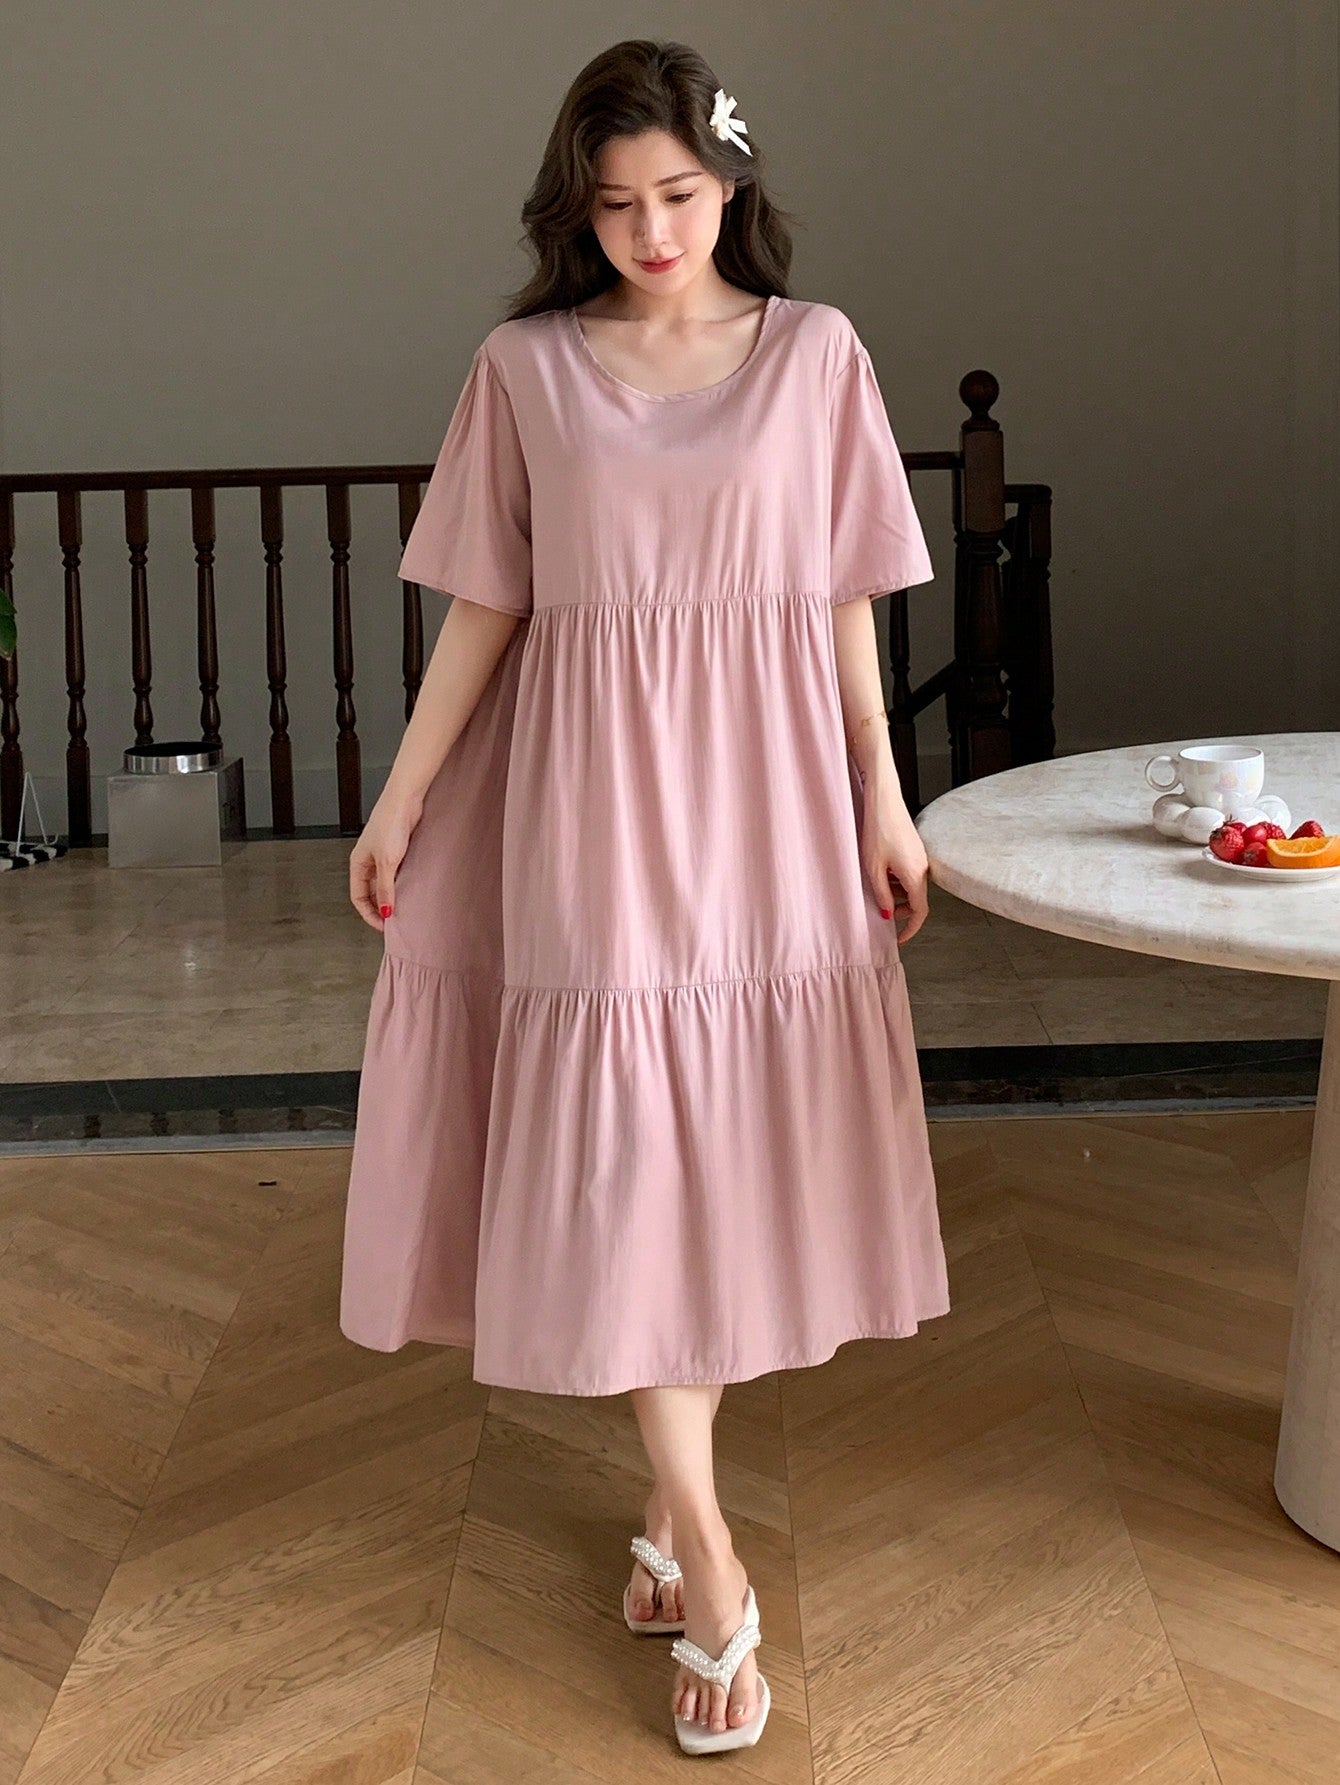 Loose-Fitting Pleated Cake Dress For Home And Casual Wear